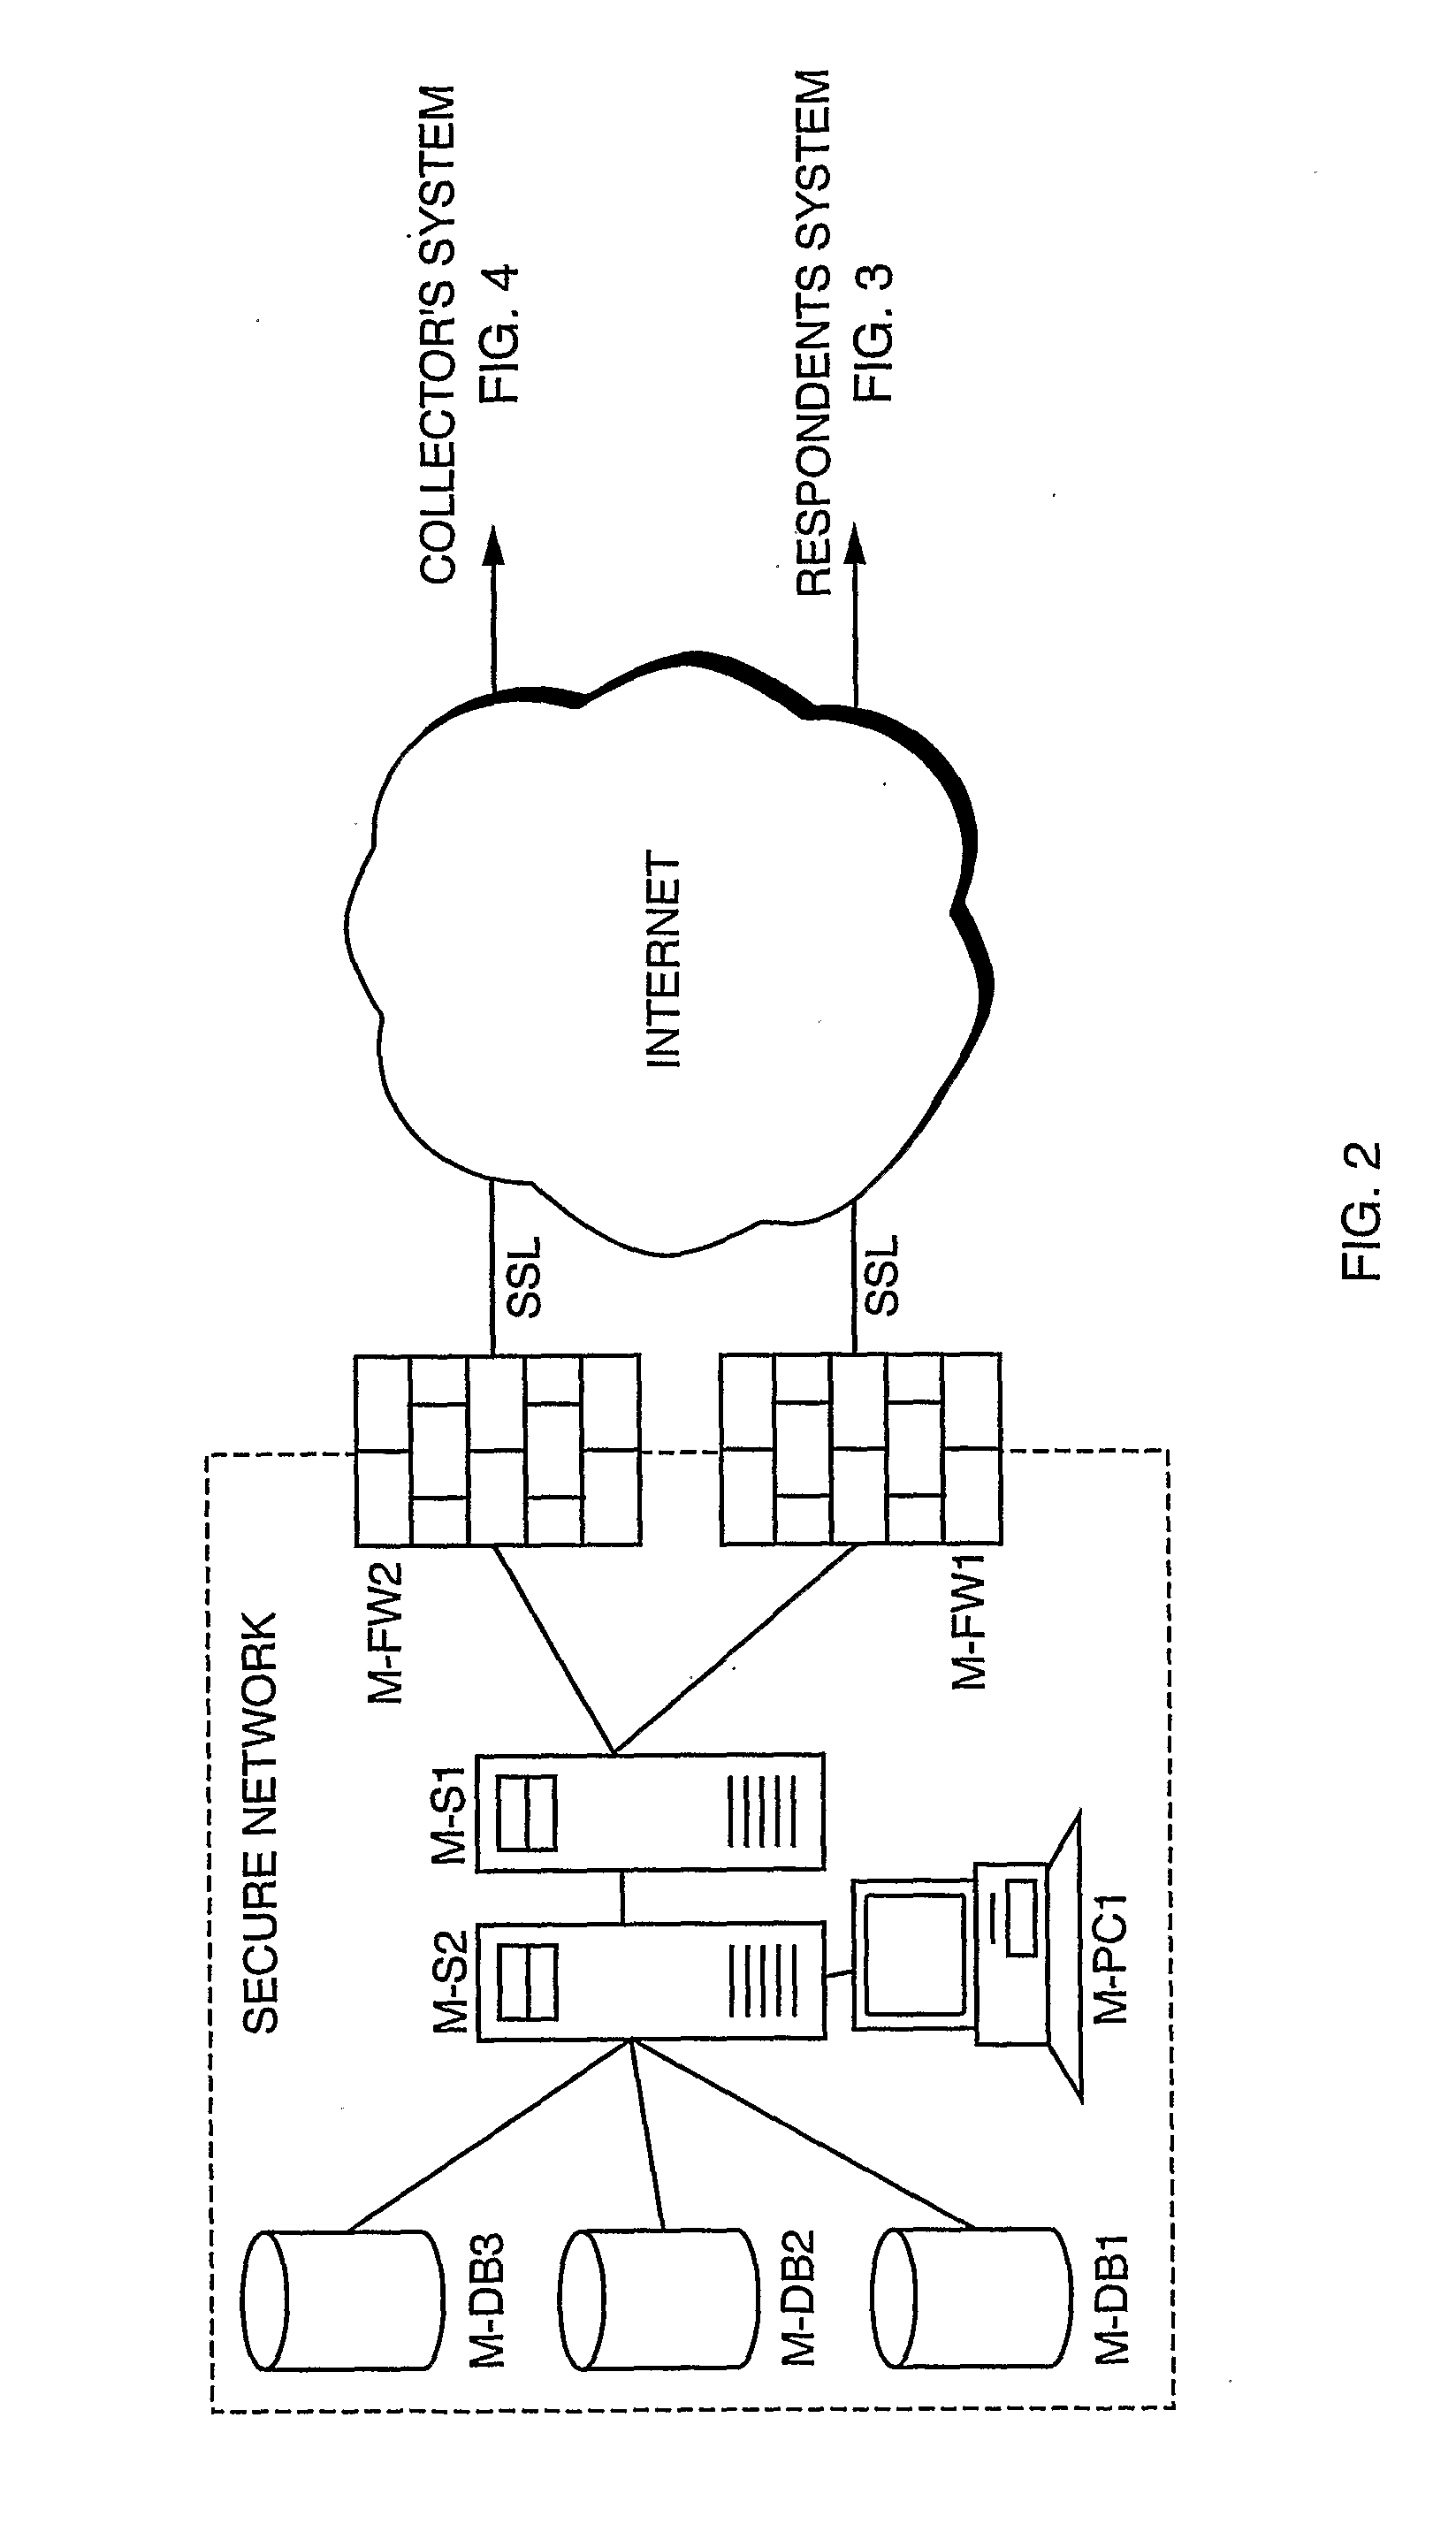 Transmission of Anonymous Information Through a Communication Network